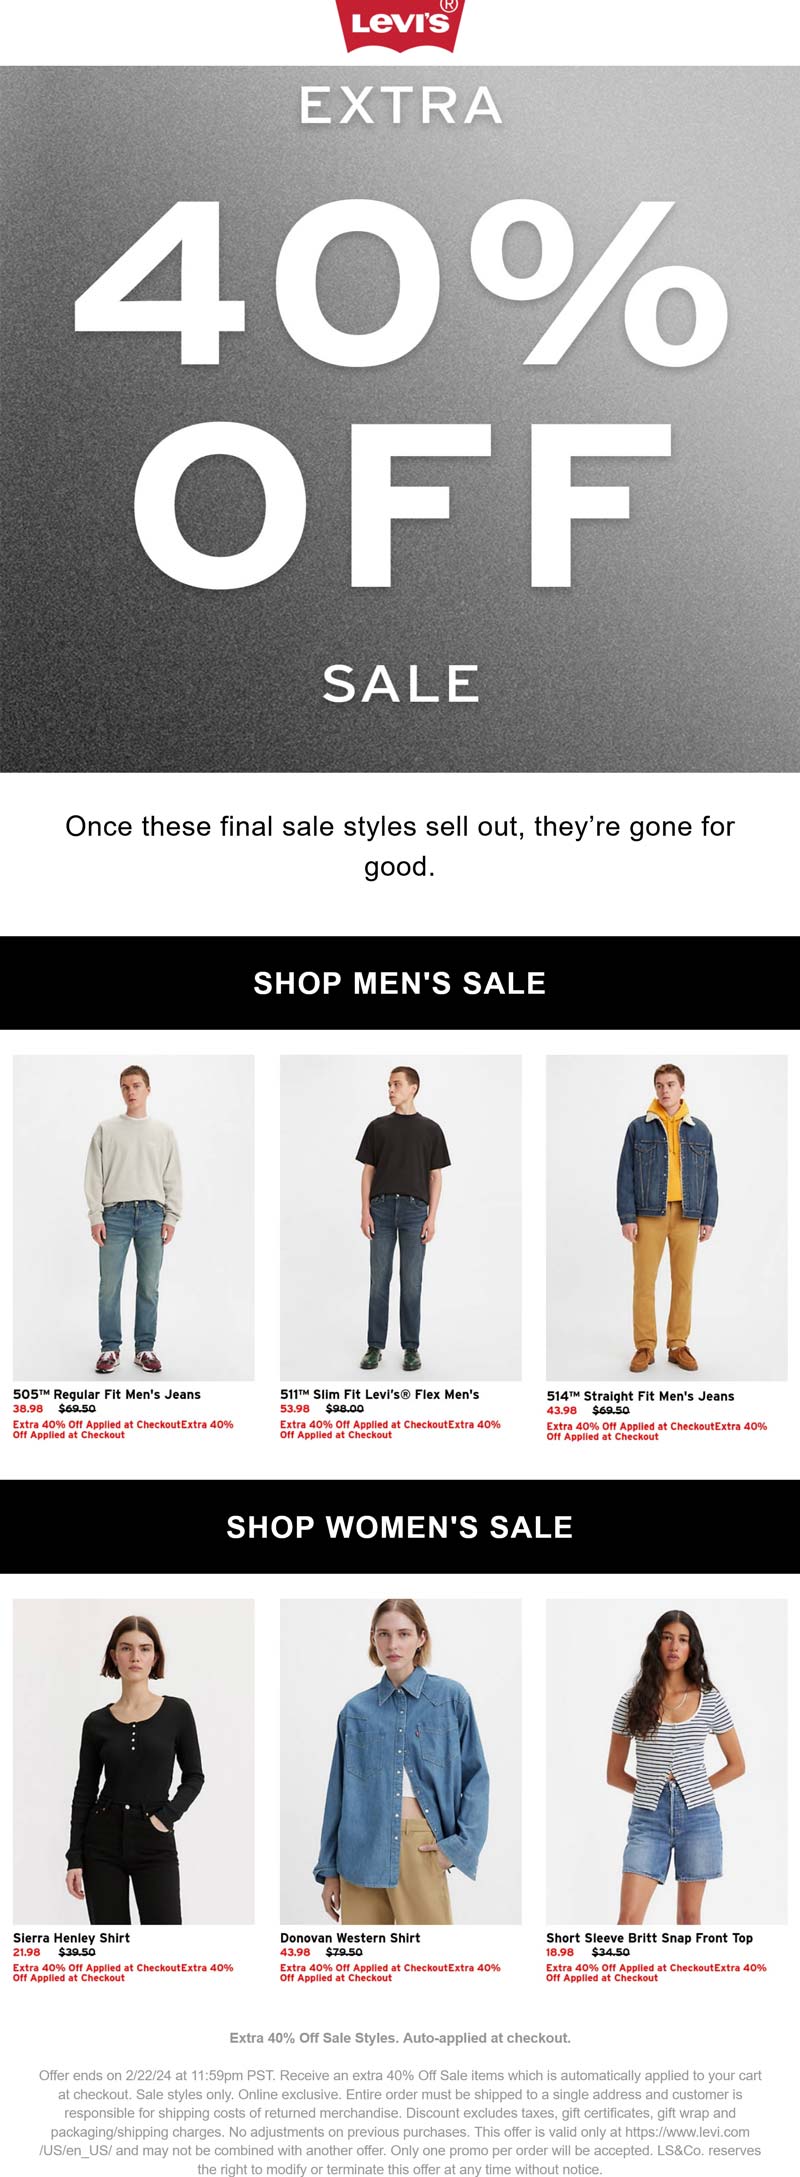 Levis stores Coupon  Extra 40% off sale styles online at Levis #levis 